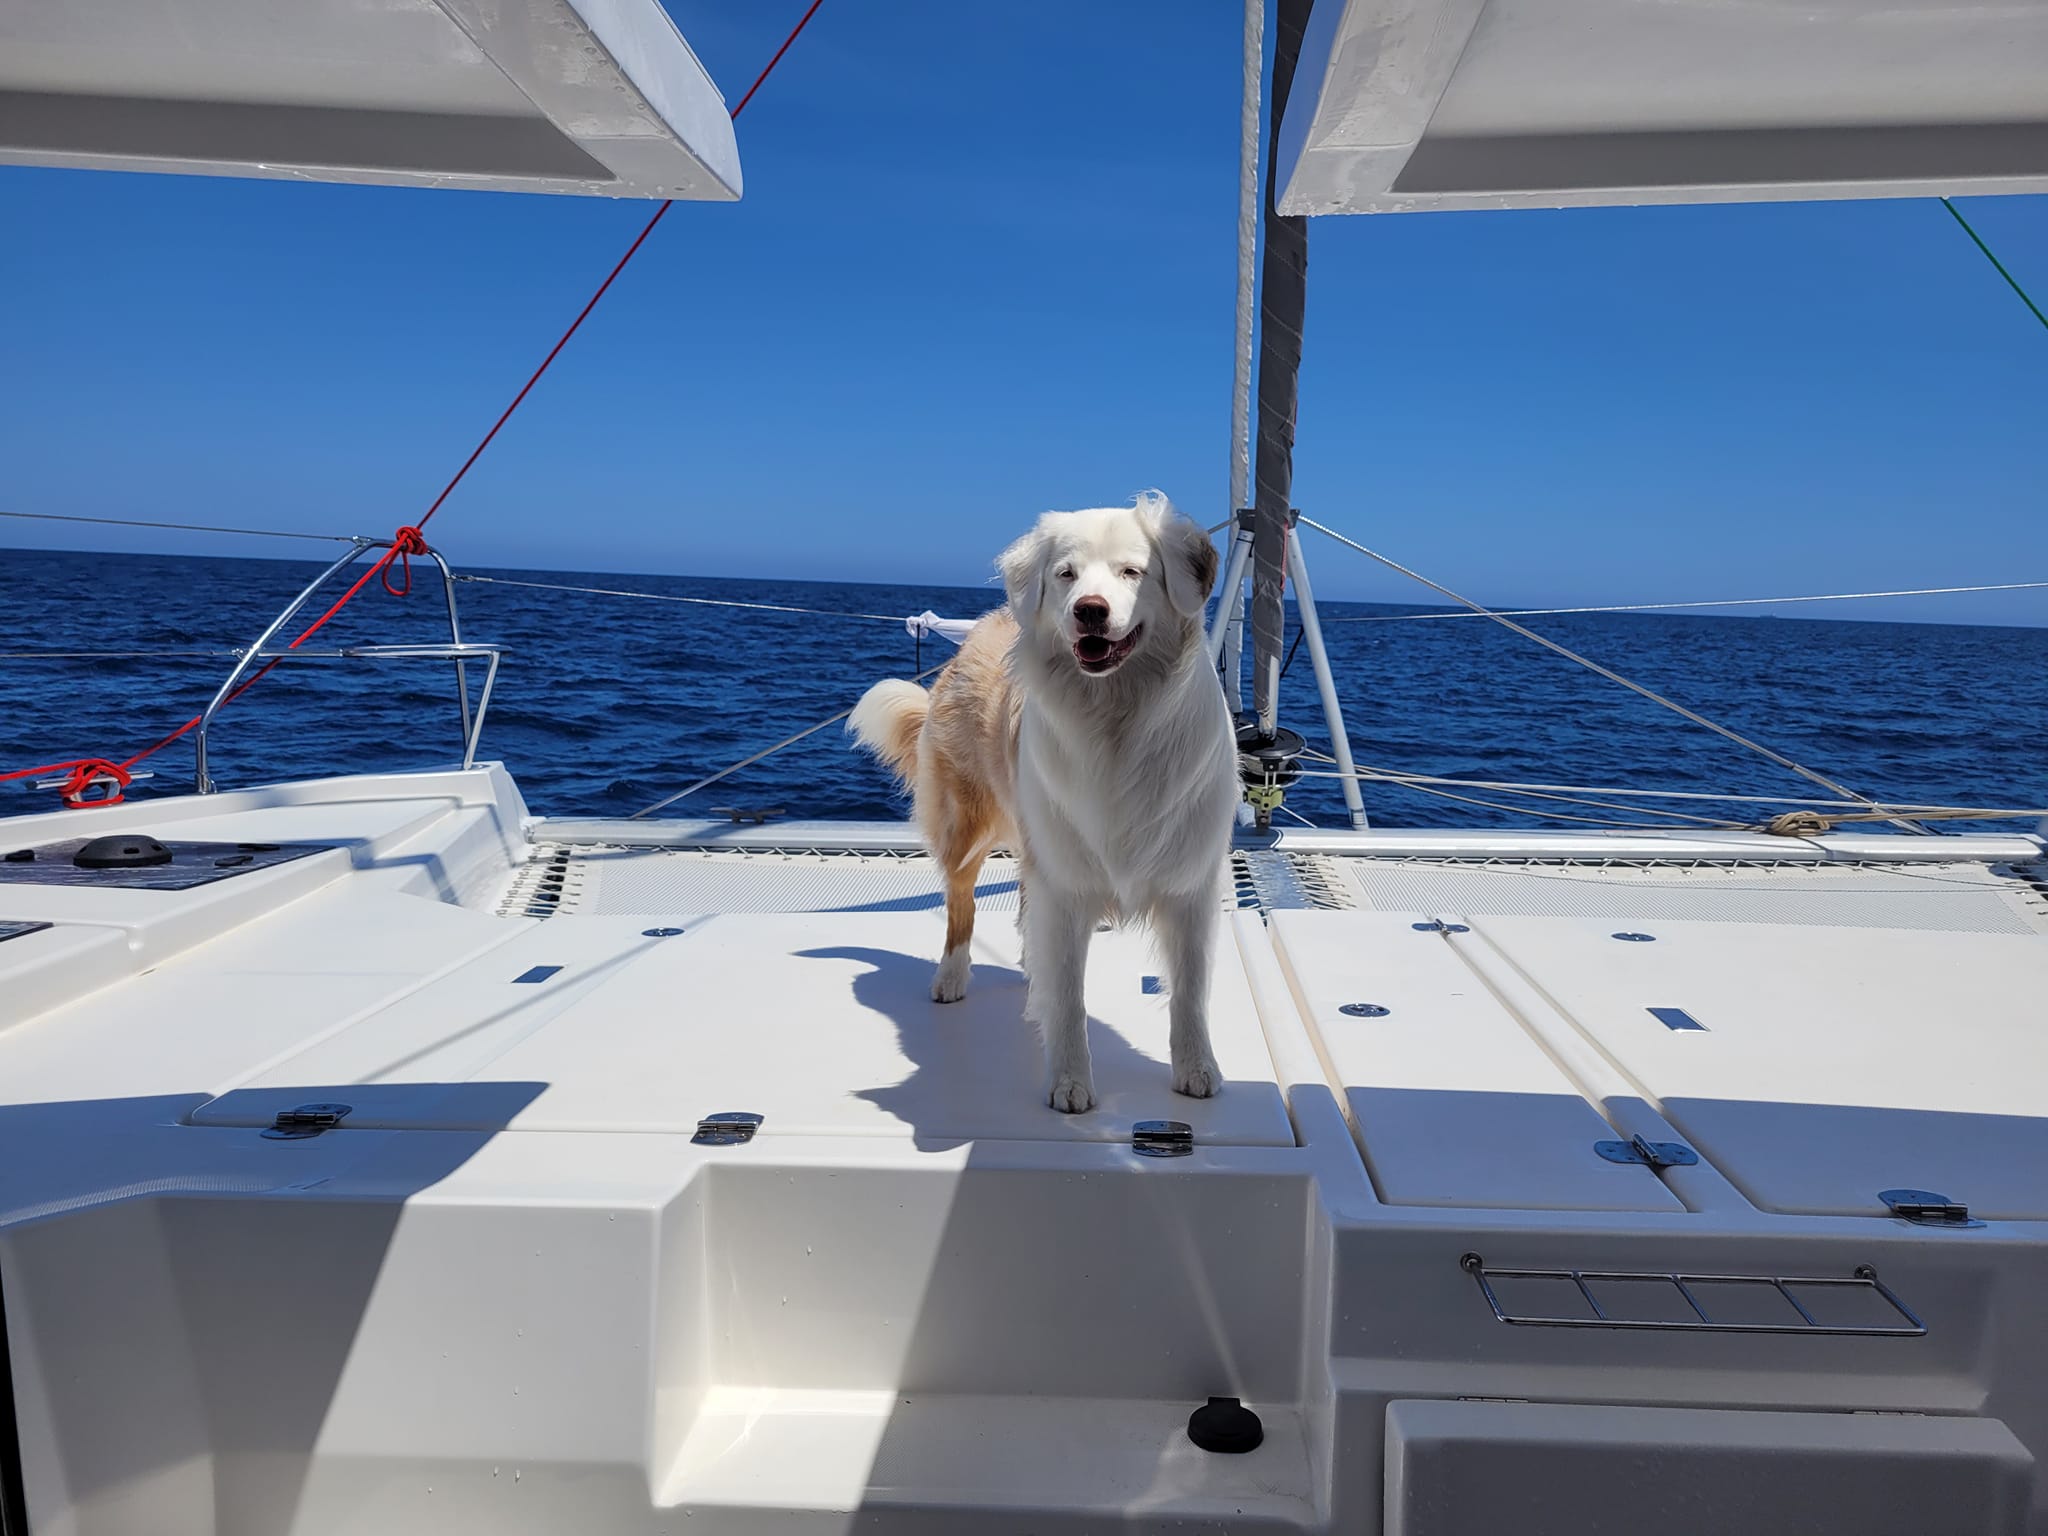 An owners insight into sailing with a dog aboard